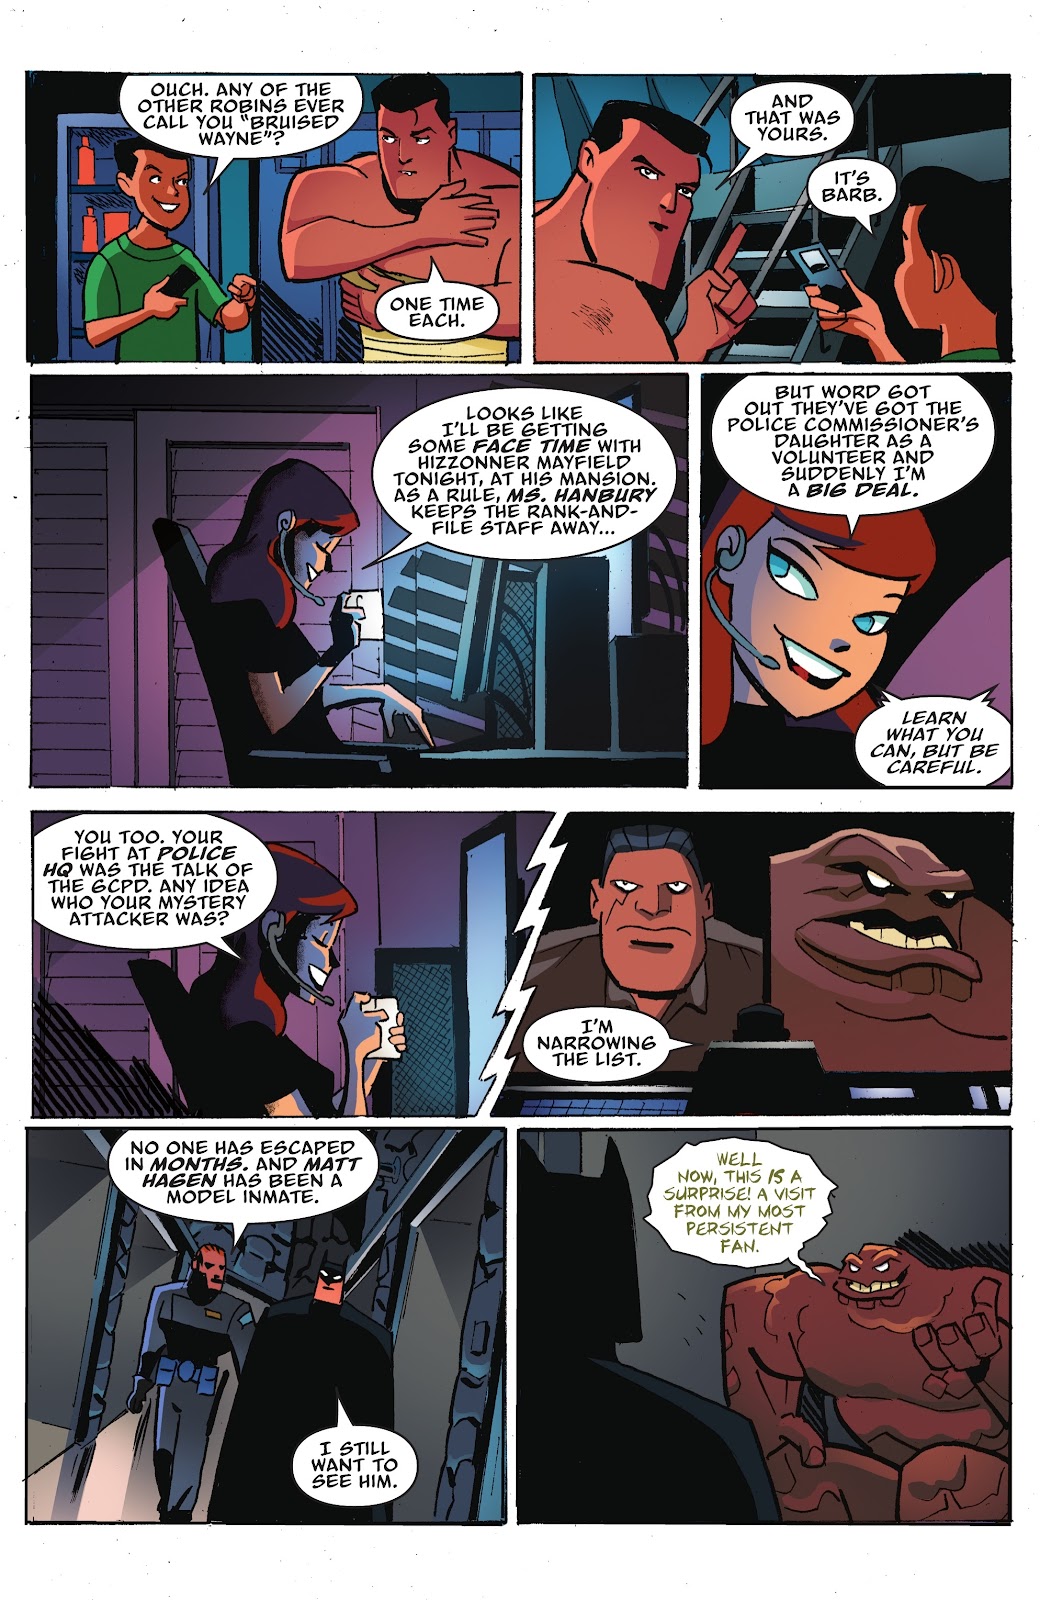 Batman: The Adventures Continue: Season Two issue 6 - Page 15